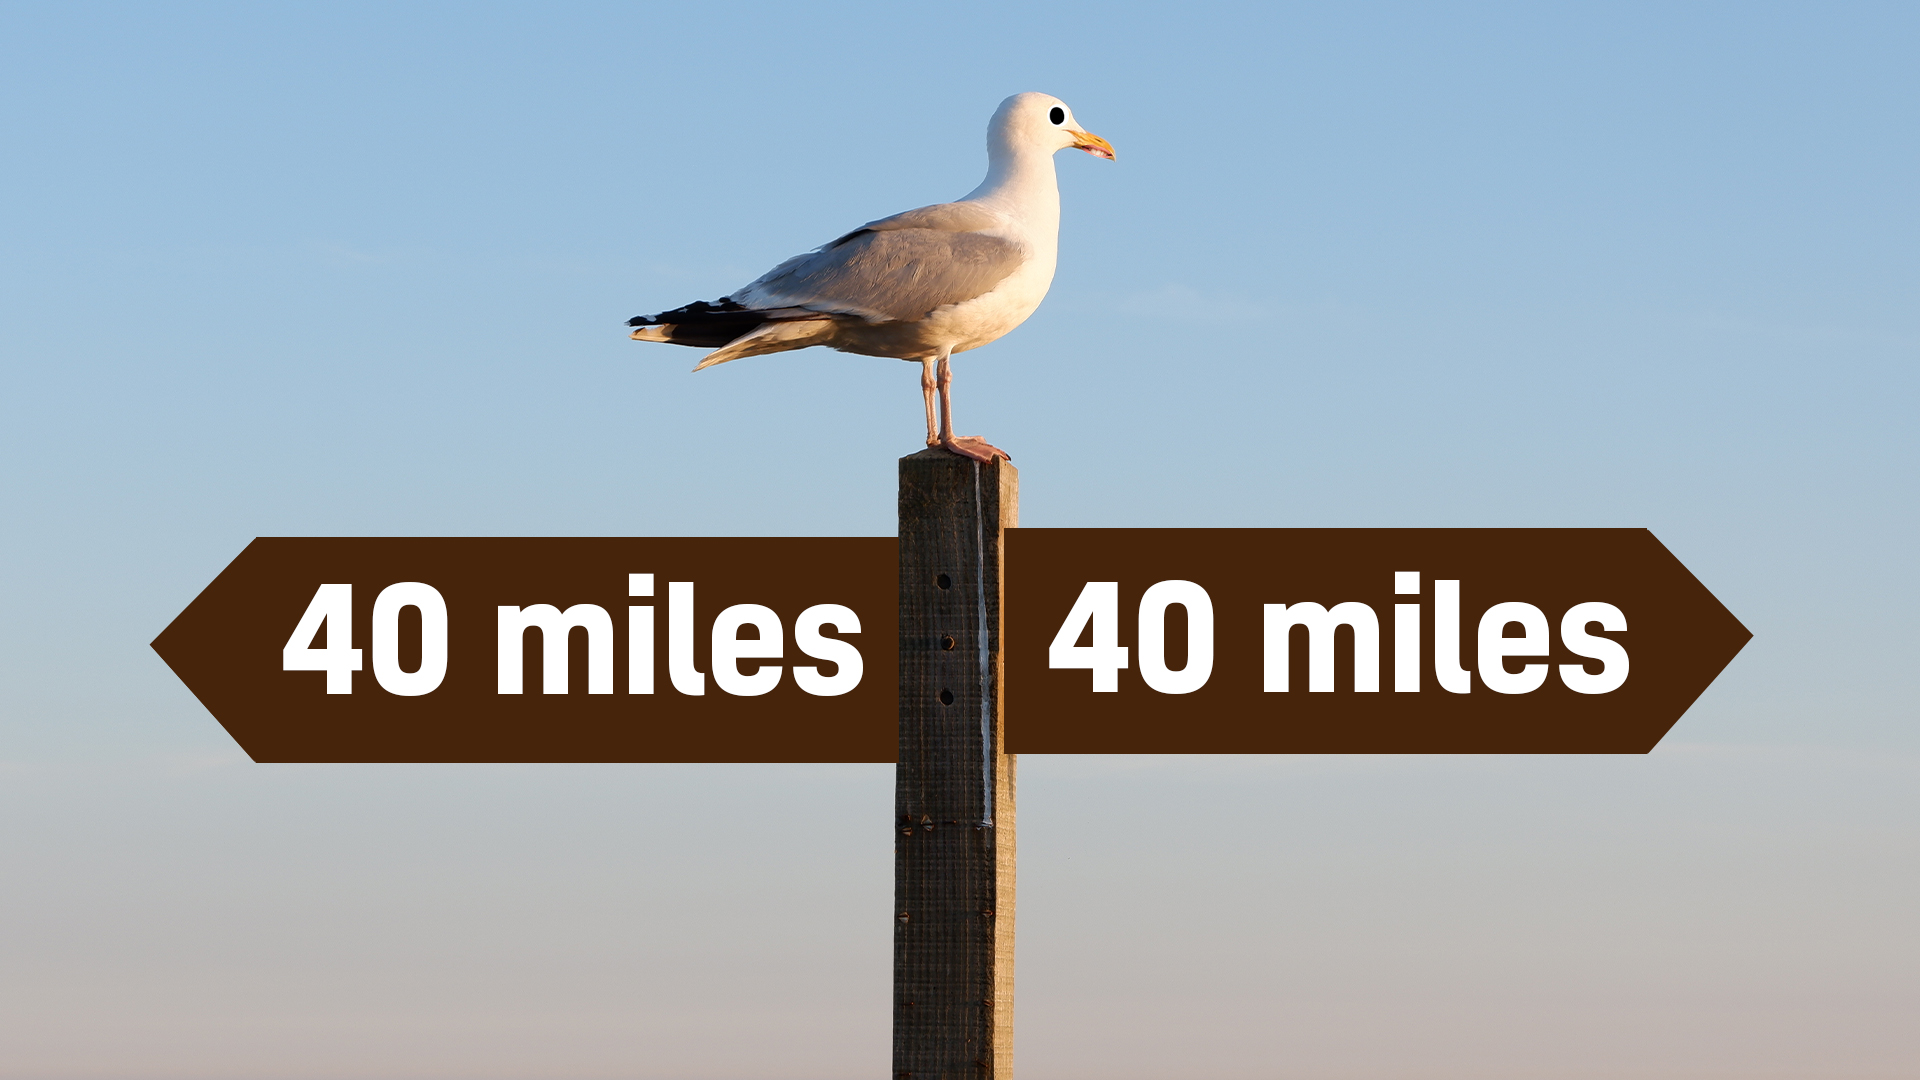 A seagull on a signpost 